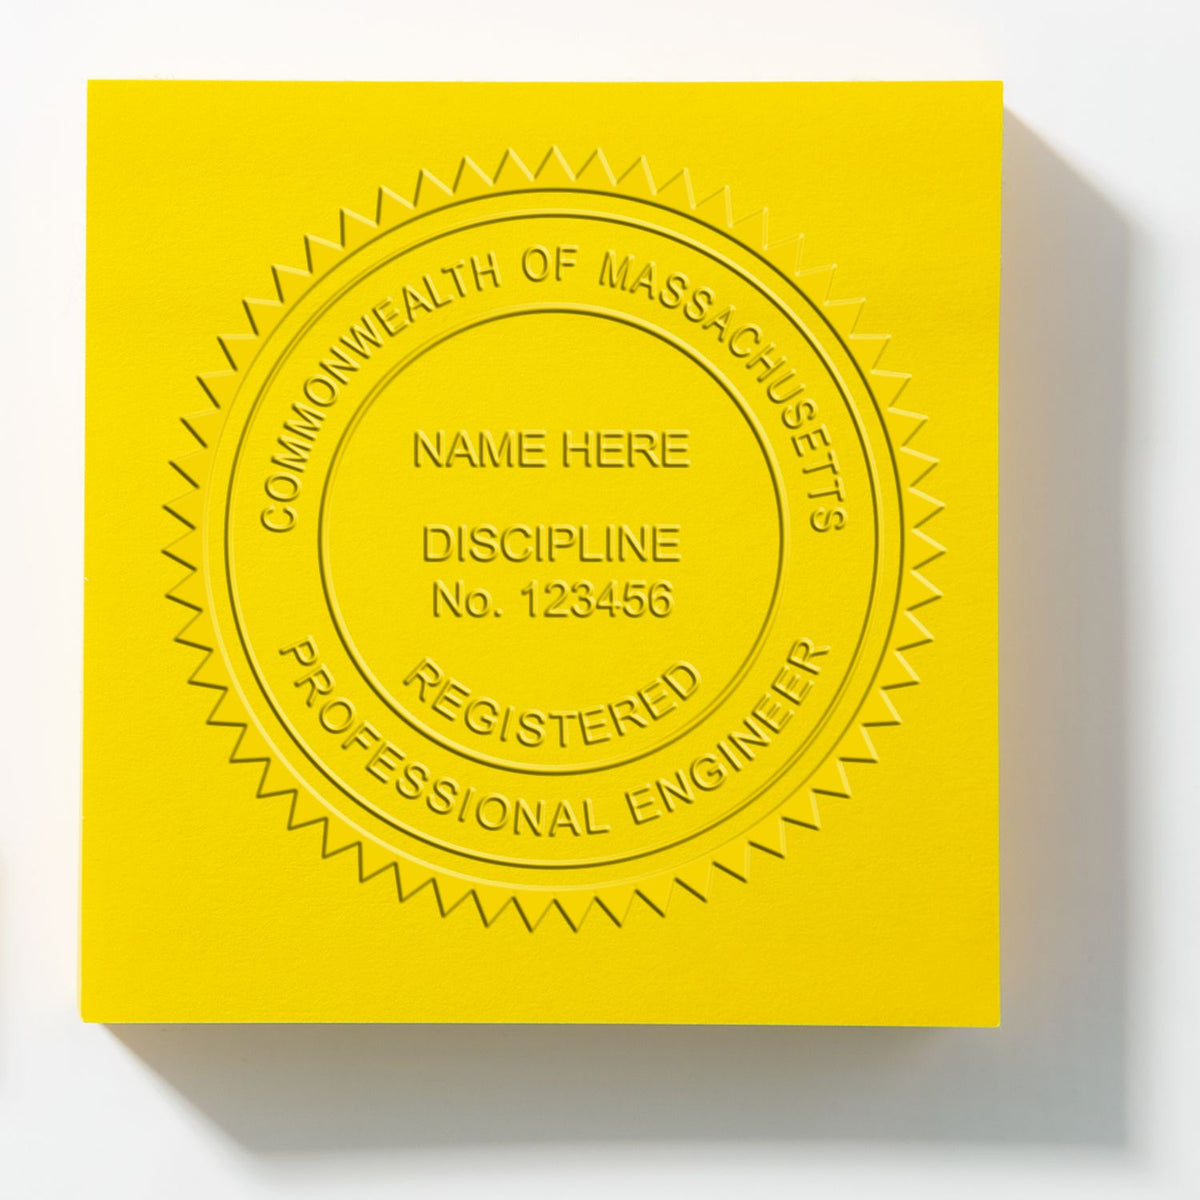 An in use photo of the Gift Massachusetts Engineer Seal showing a sample imprint on a cardstock